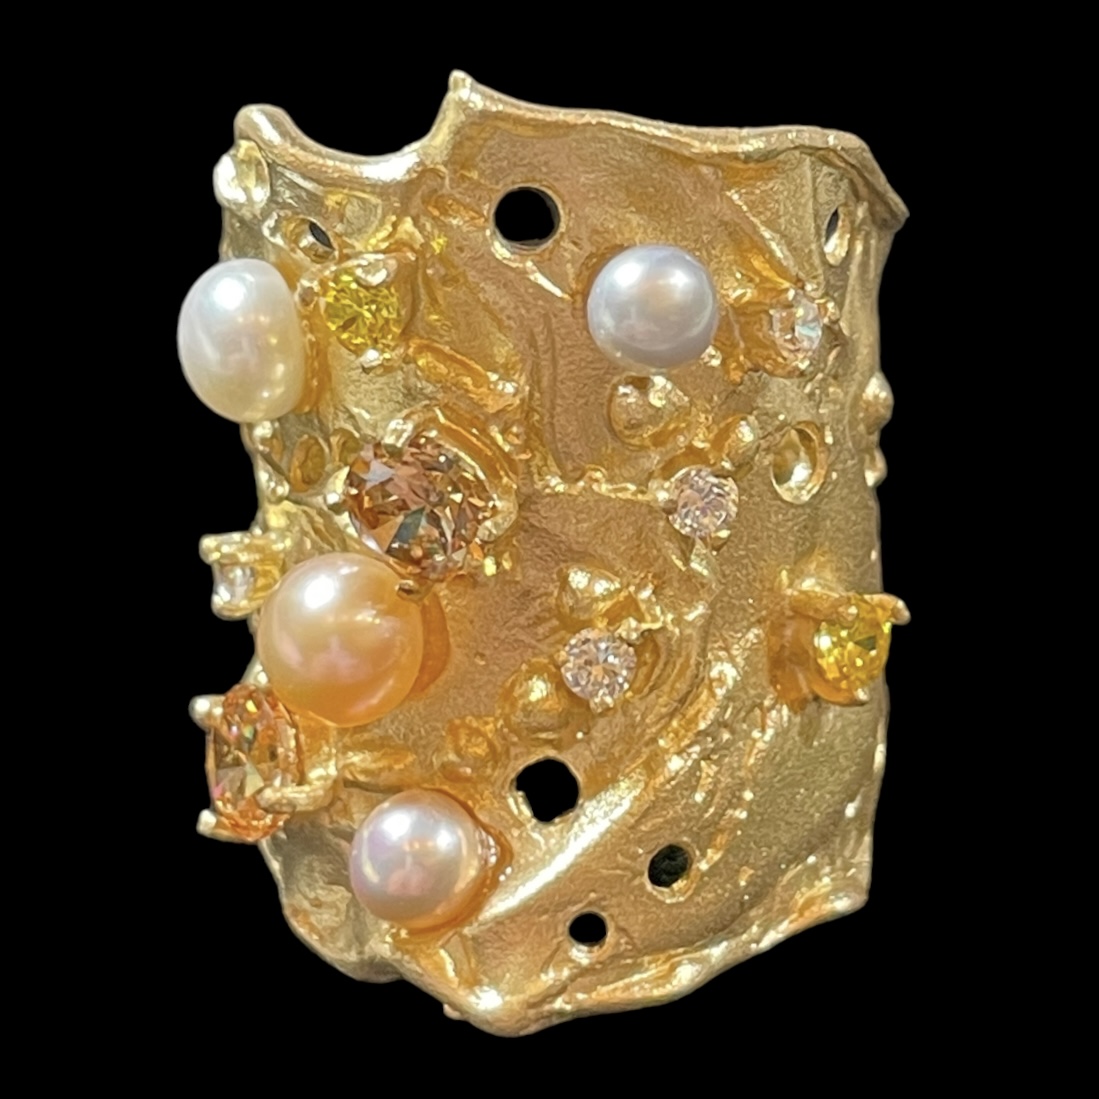 Wide and matte gold-plated ring with pearls and colored stones